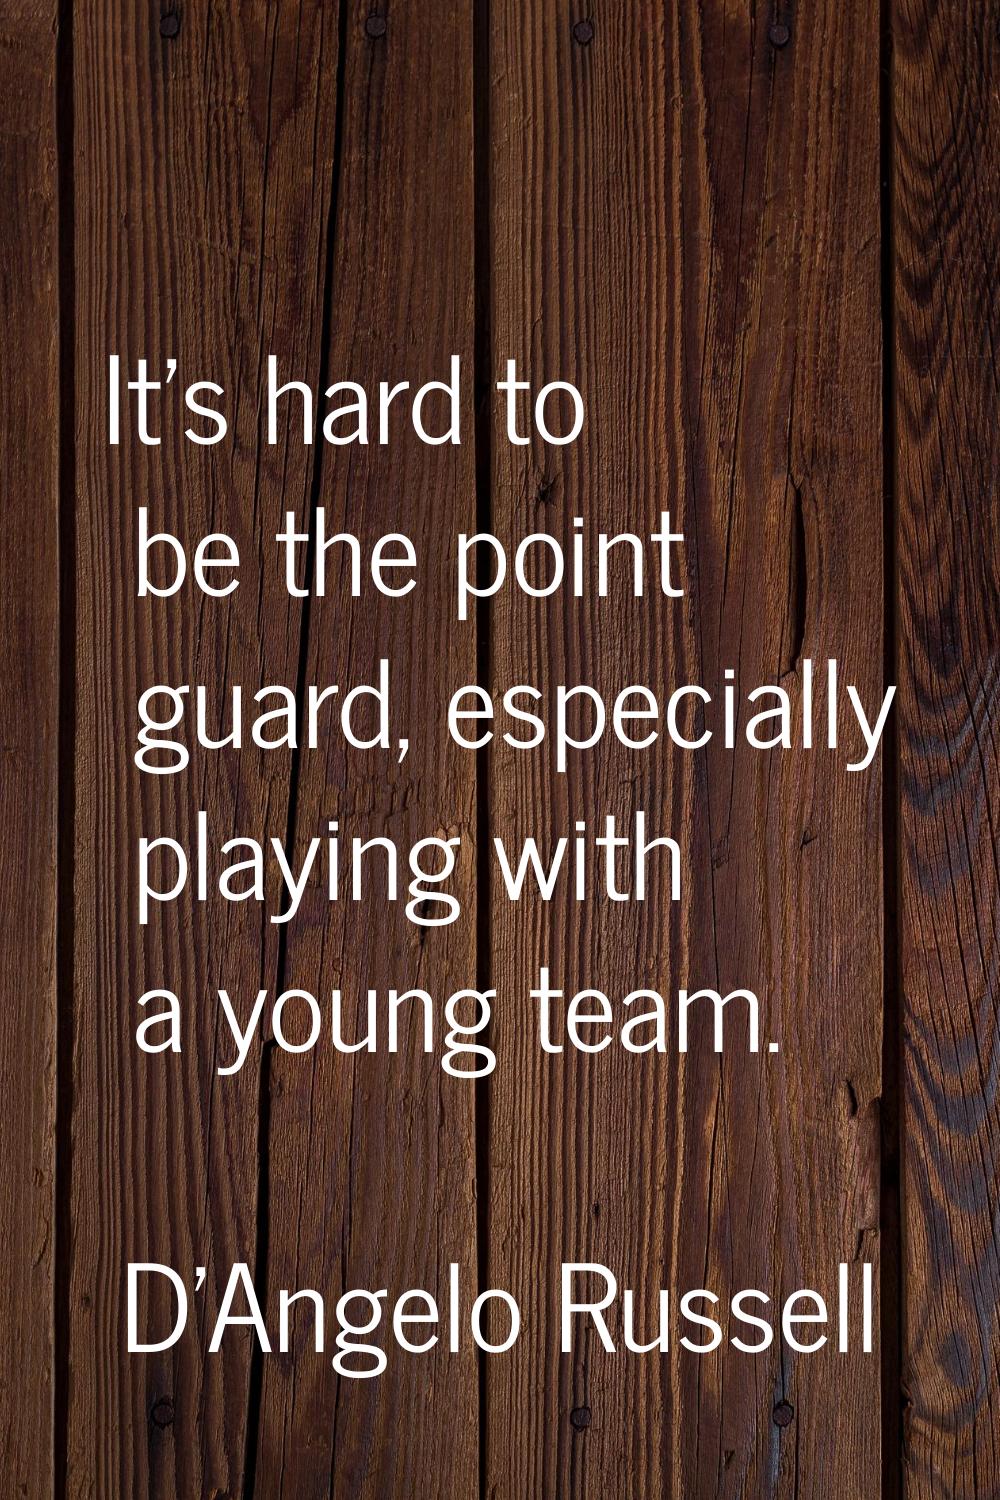 It's hard to be the point guard, especially playing with a young team.